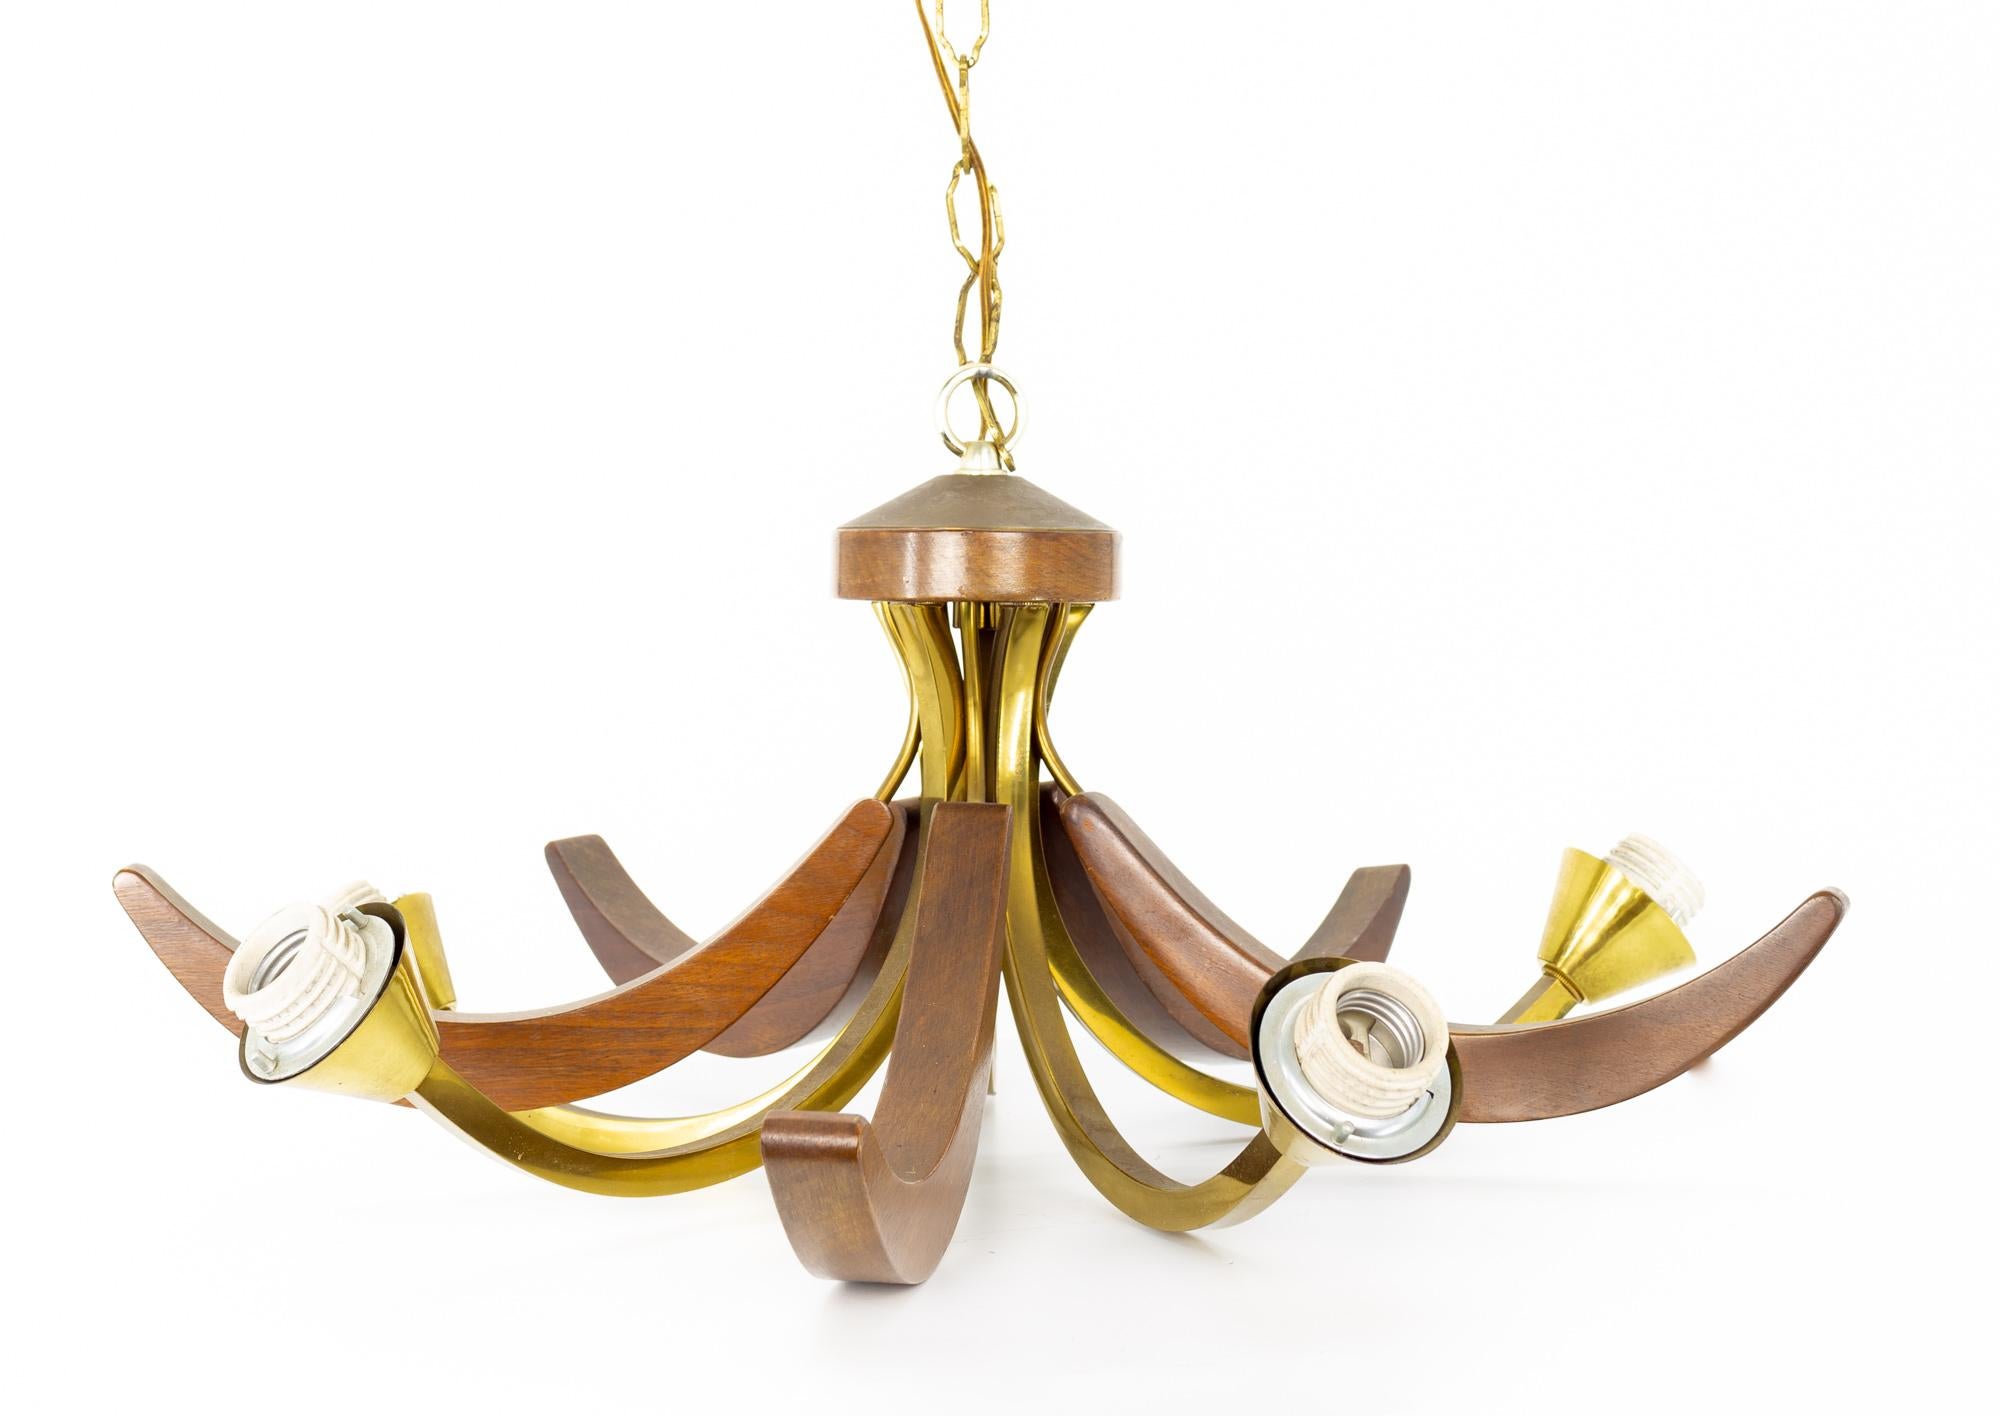 Max Sauze lightolier brass & walnut mid century chandelier

This piece measures: 23 wide x 23 deep x 12 inches high with a chain length of 13 inches

Excellent vintage condition

We take our photos in a controlled lighting studio to show as